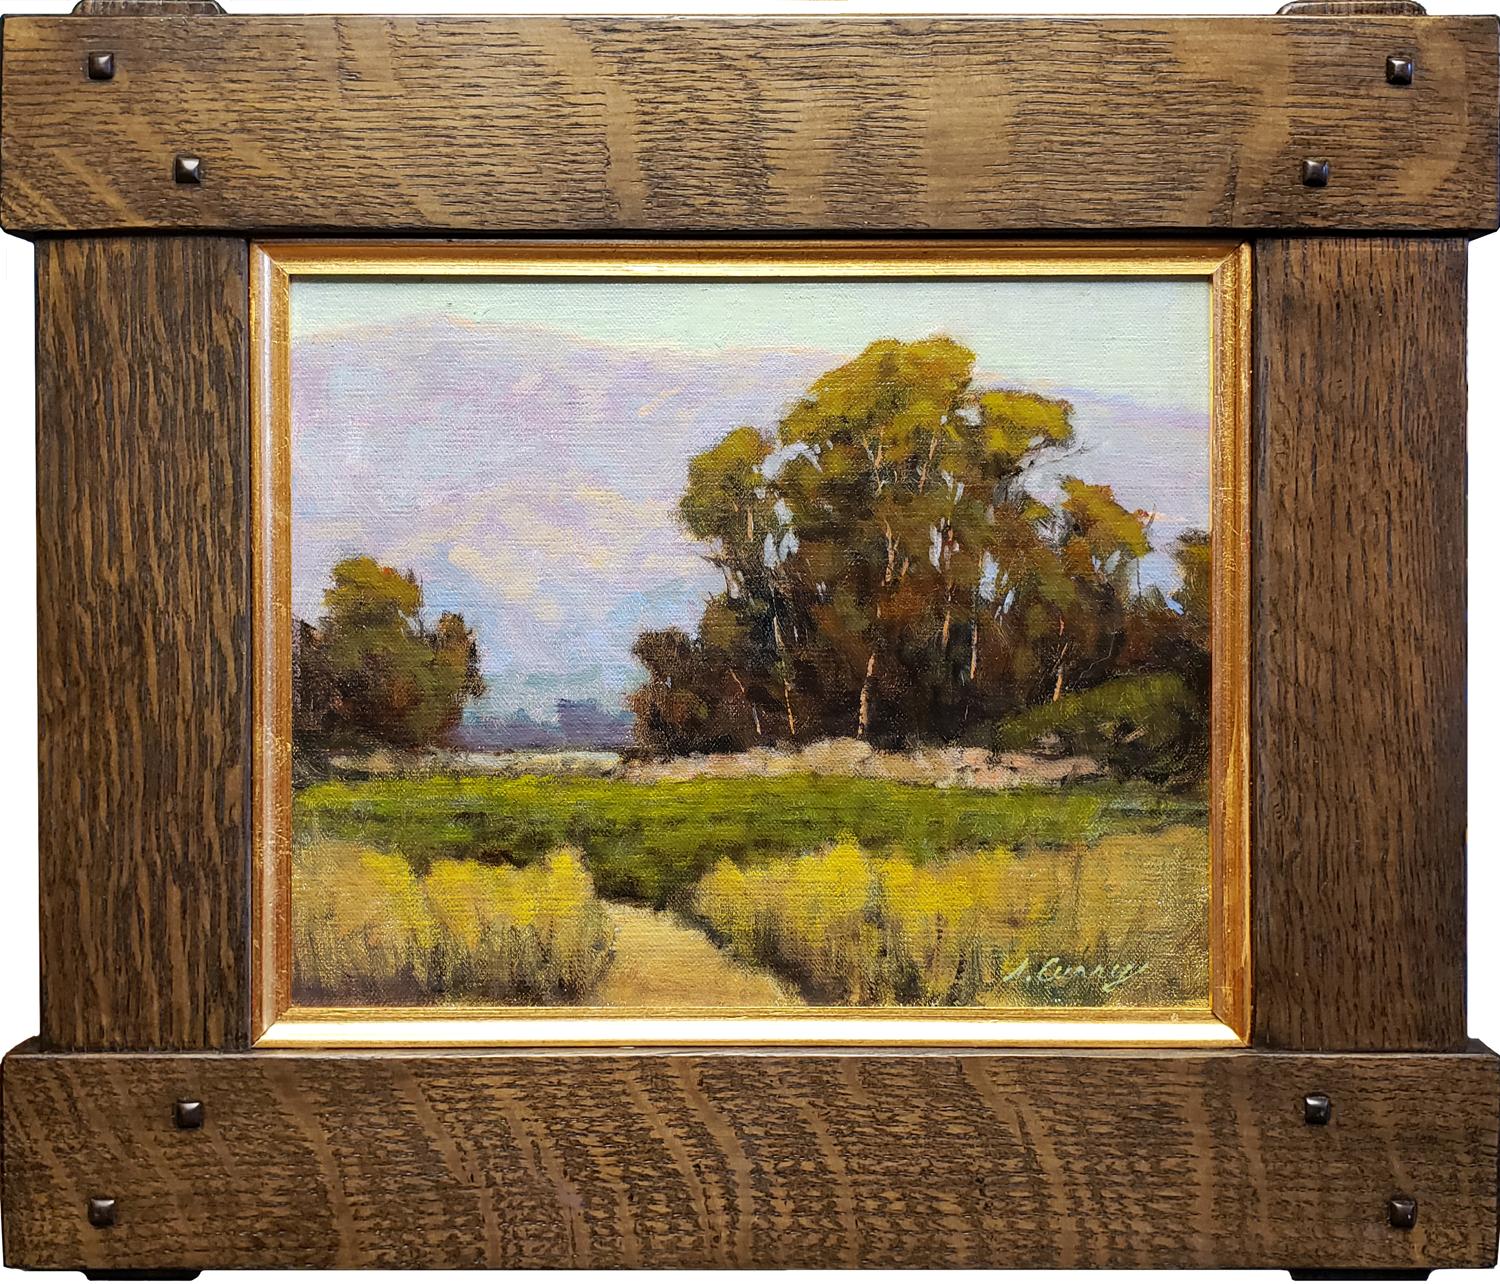 Carpenteria Foothills - Painting by Steve Curry